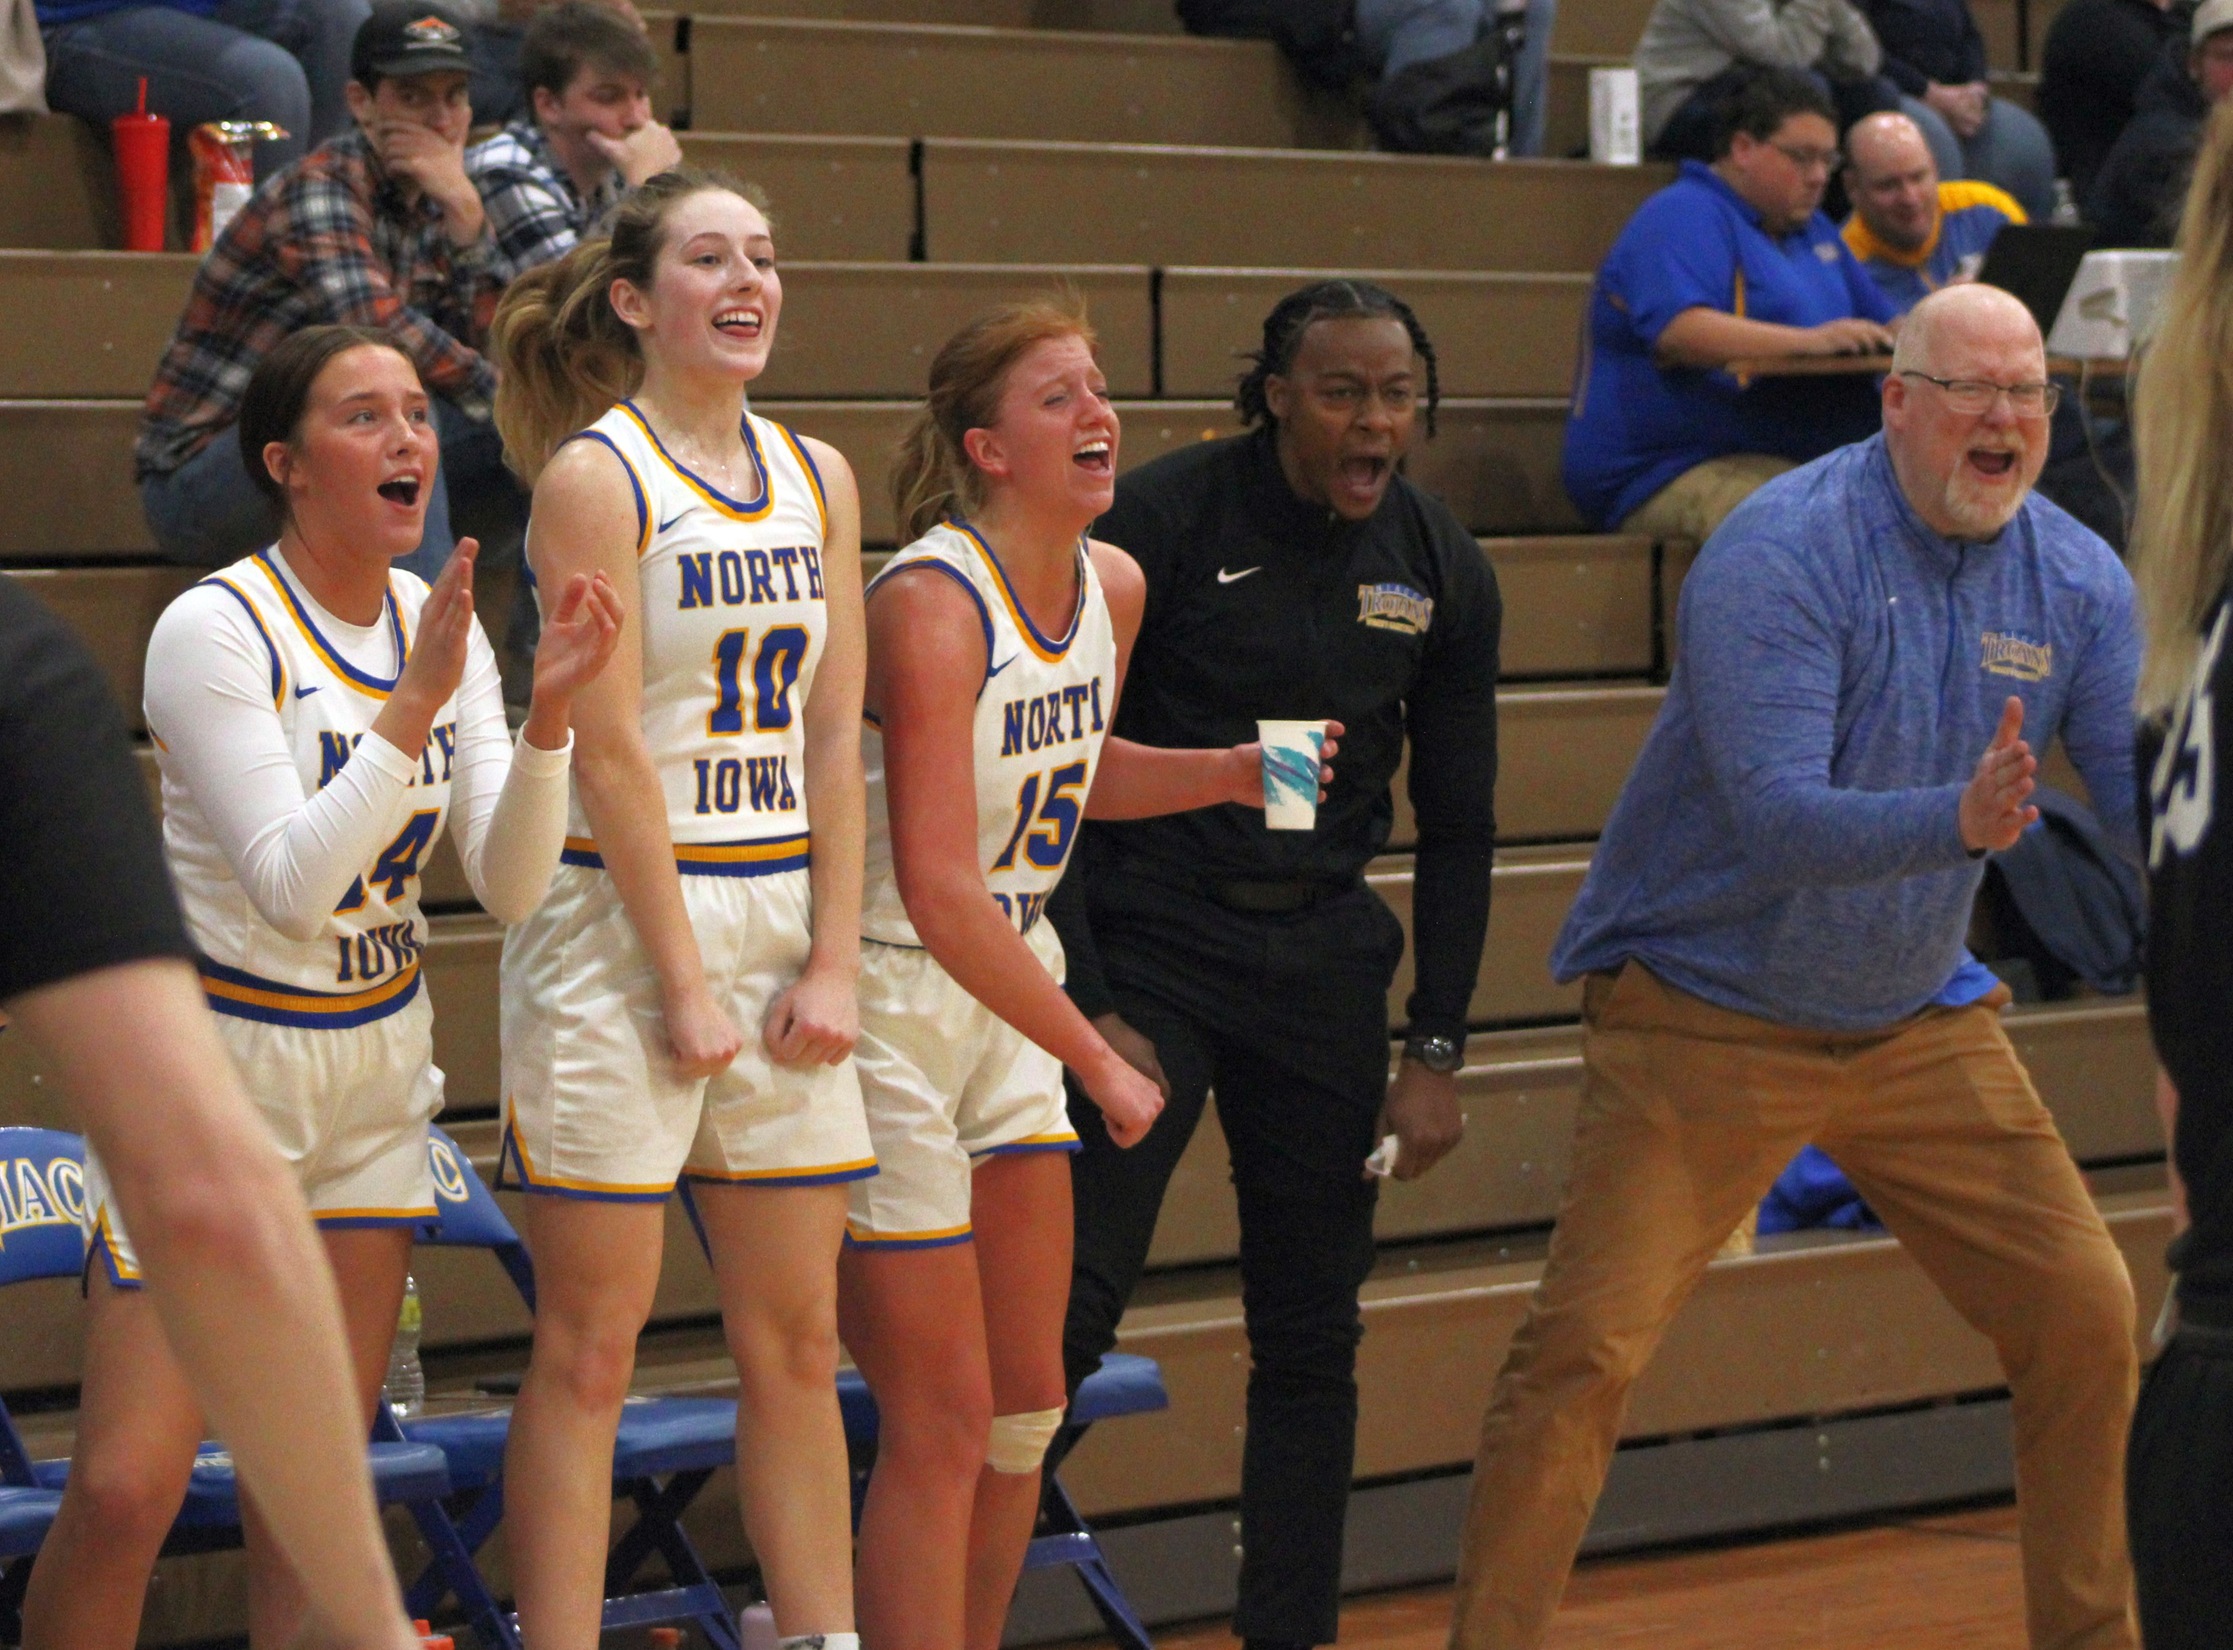 The NIACC bench celebrates a basket late in Monday's win over DMACC.